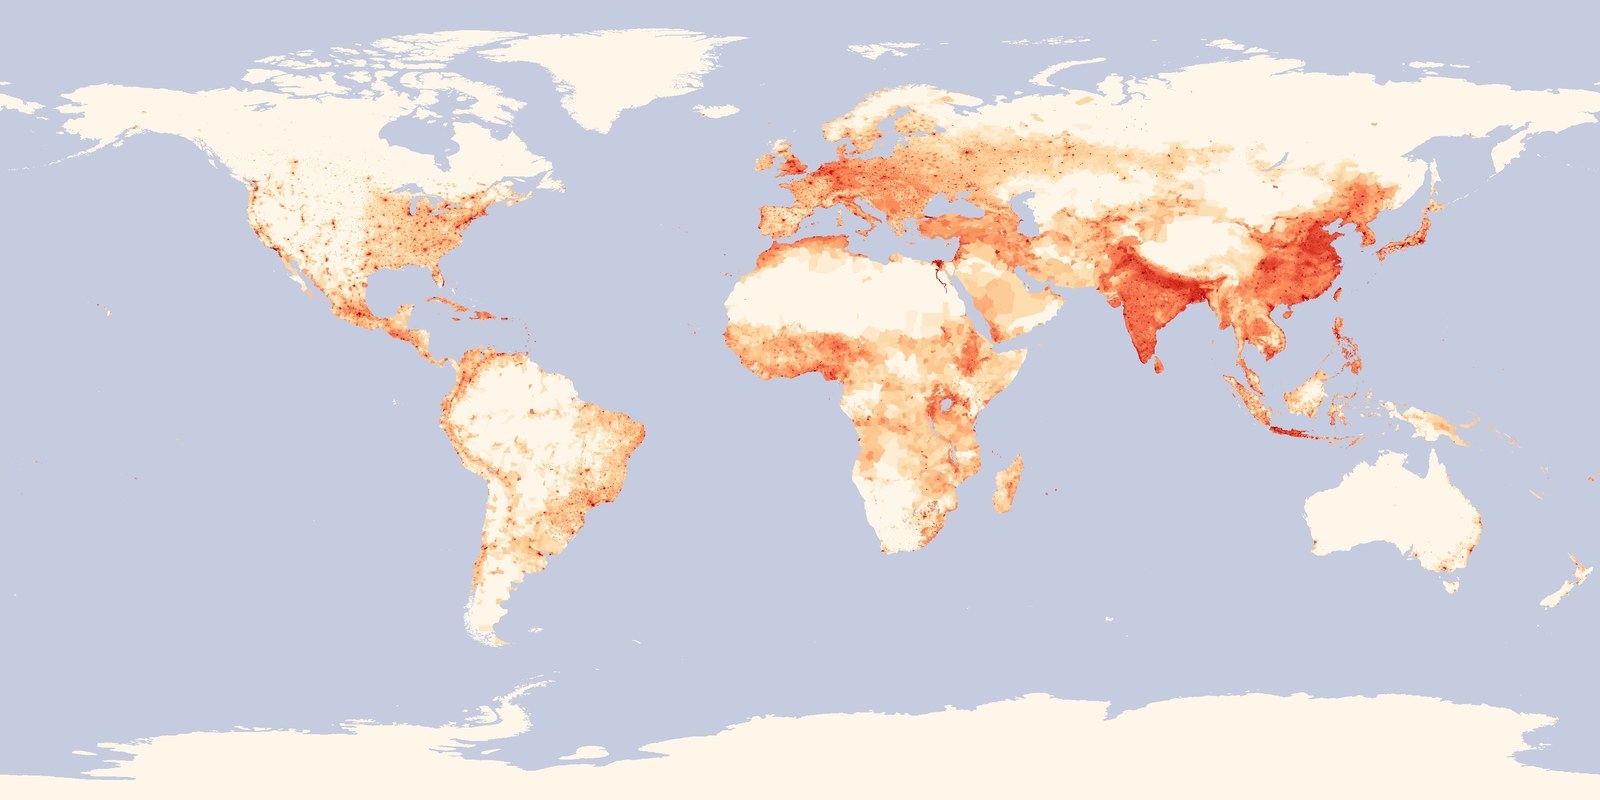 5. Correspondingly, this map shows population density: